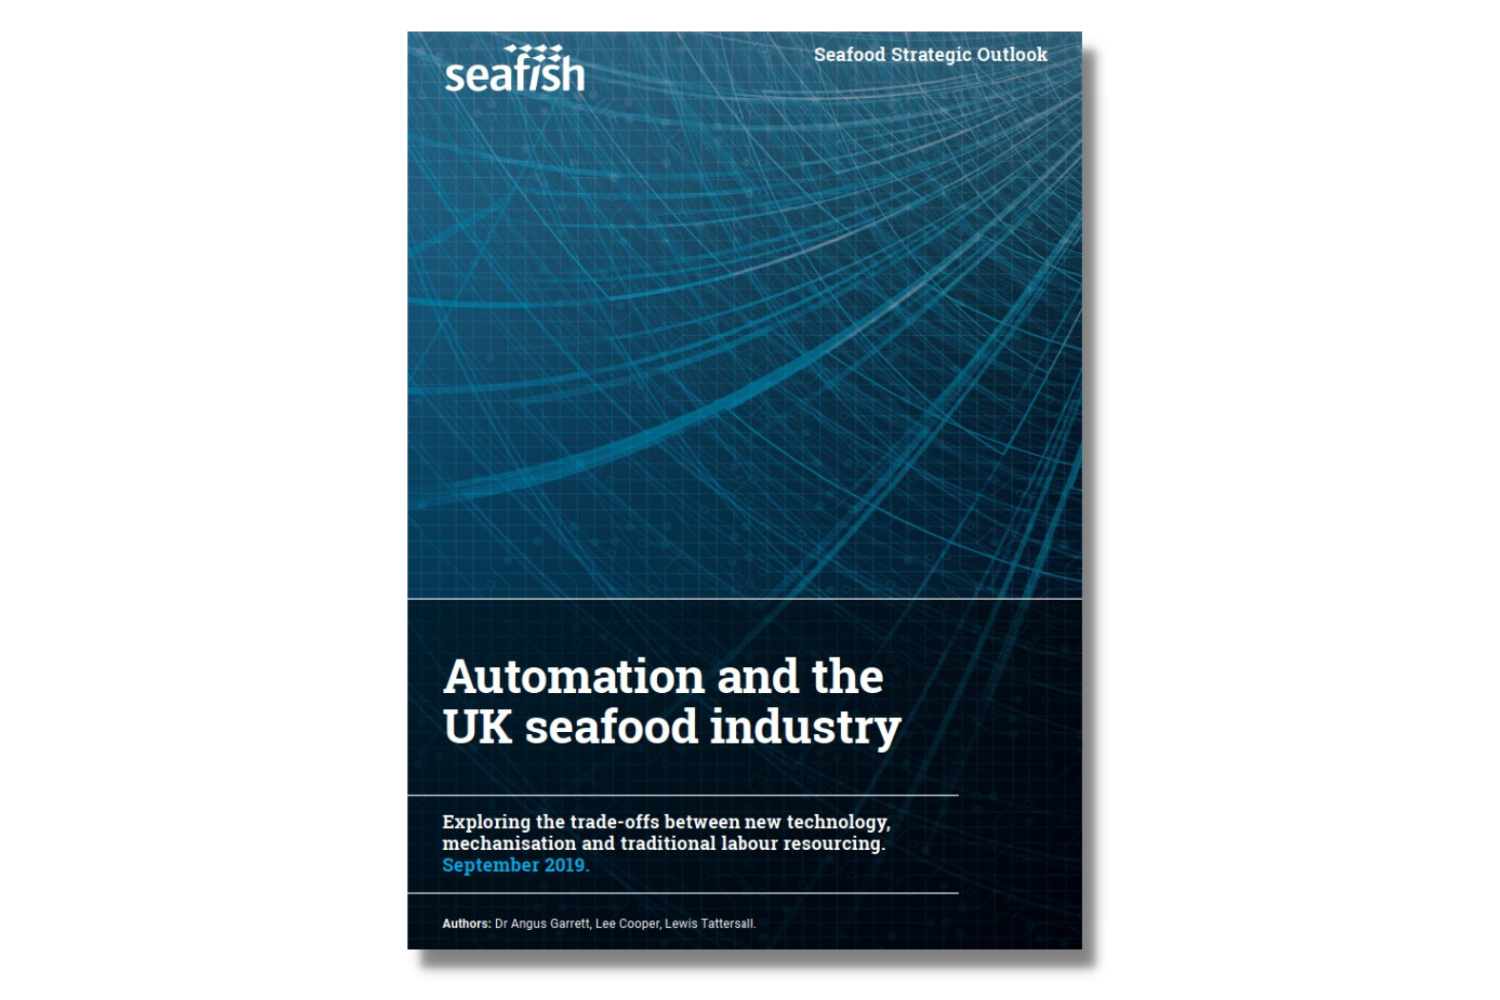 Automation and the UK seafood industry report cover page